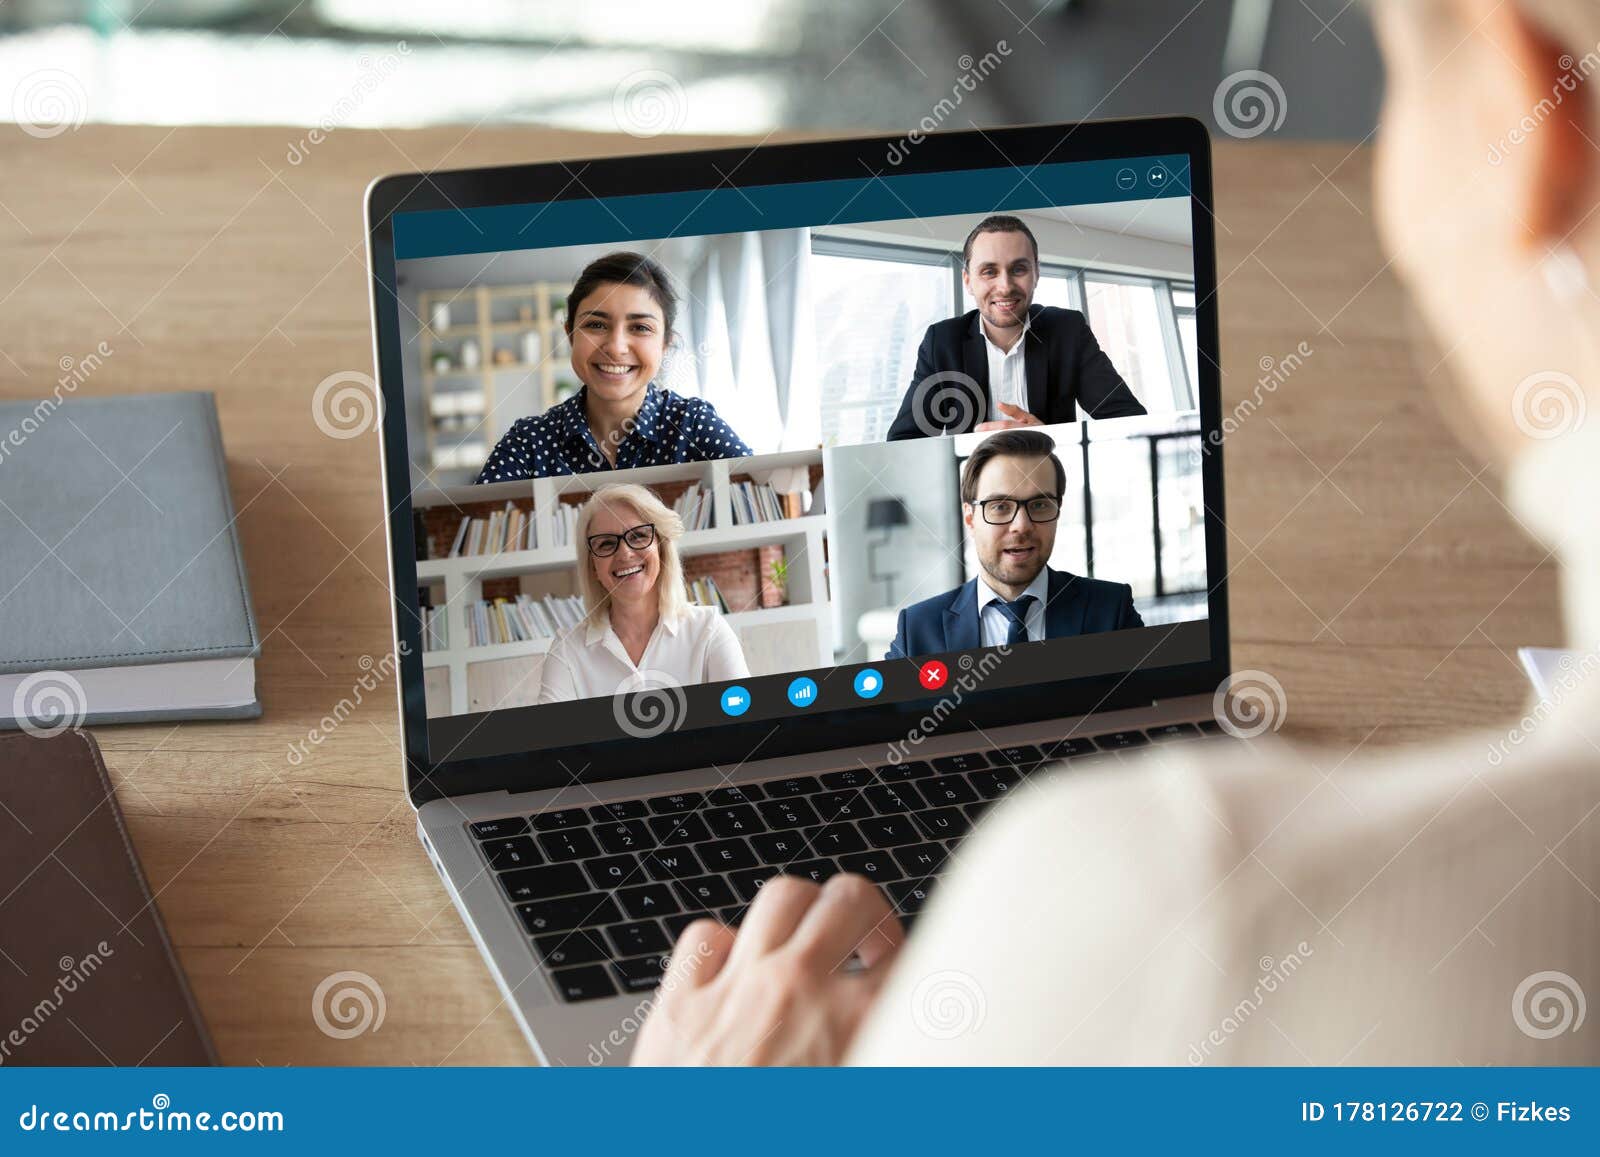 computer screen view diverse businesspeople negotiating distantly using videocall